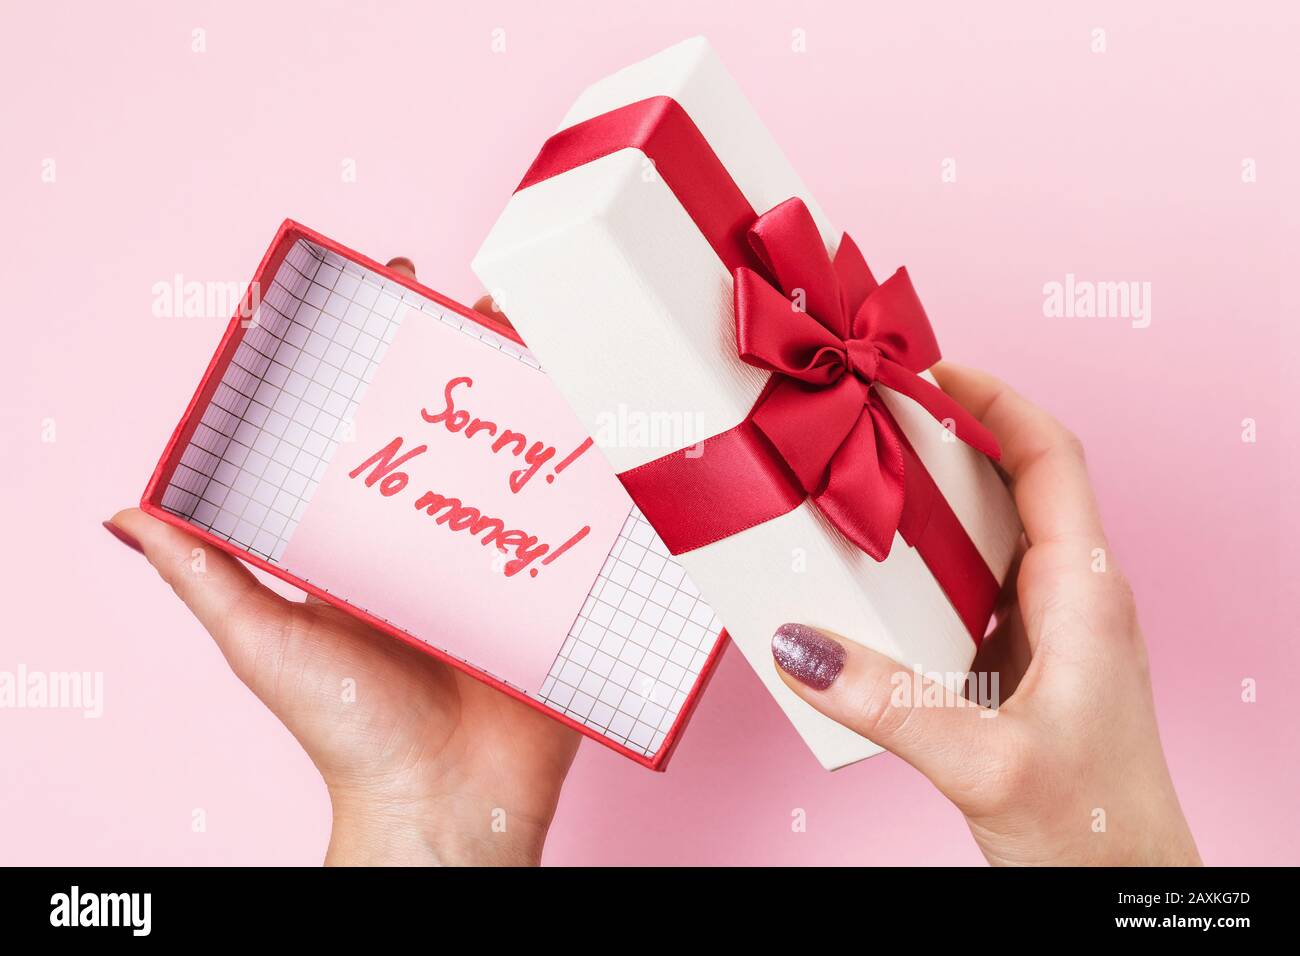 Girl opens a box with a gift on a pink background, top view. Concept on the topic of lack of money to buy gifts Stock Photo